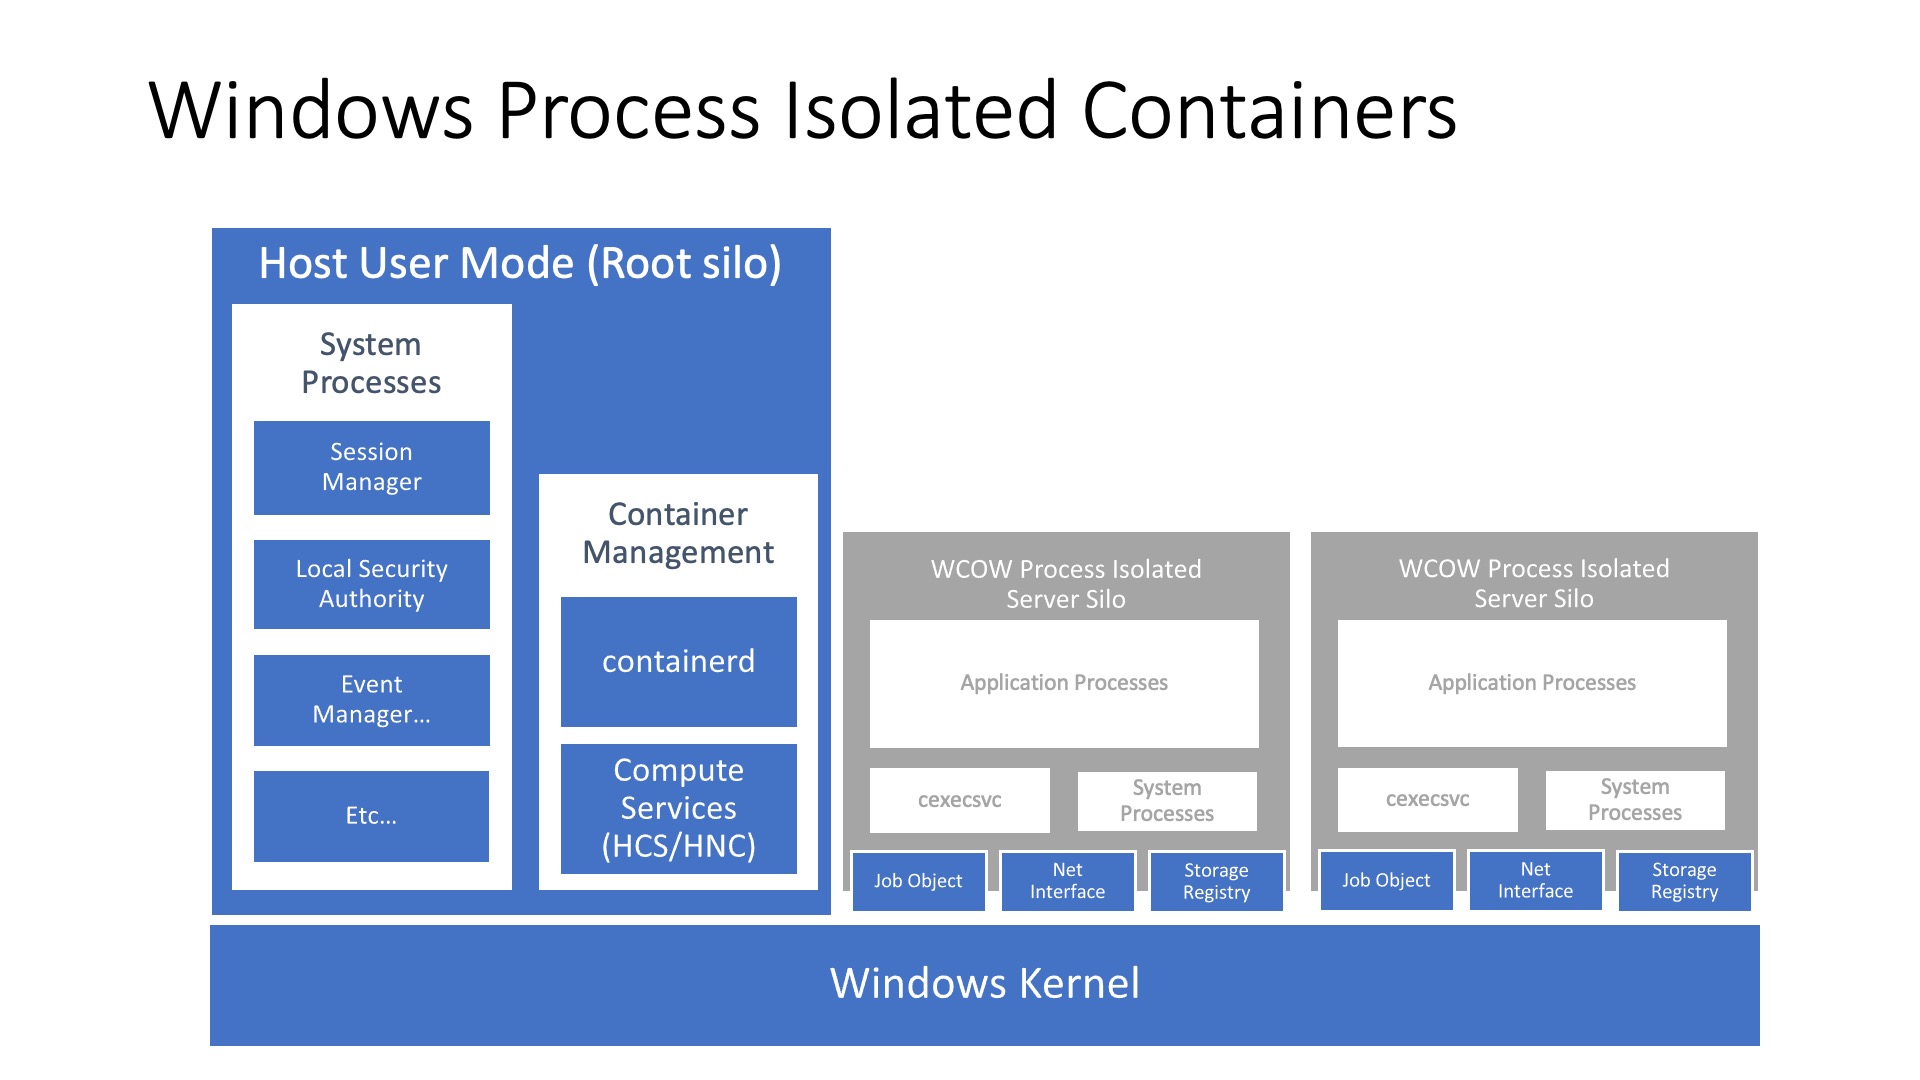 Architecture of an container running in process isolation mode. The process runs against the same kernel as the host but has an isolated view on system resources and thus isolating it from the rest of the system.